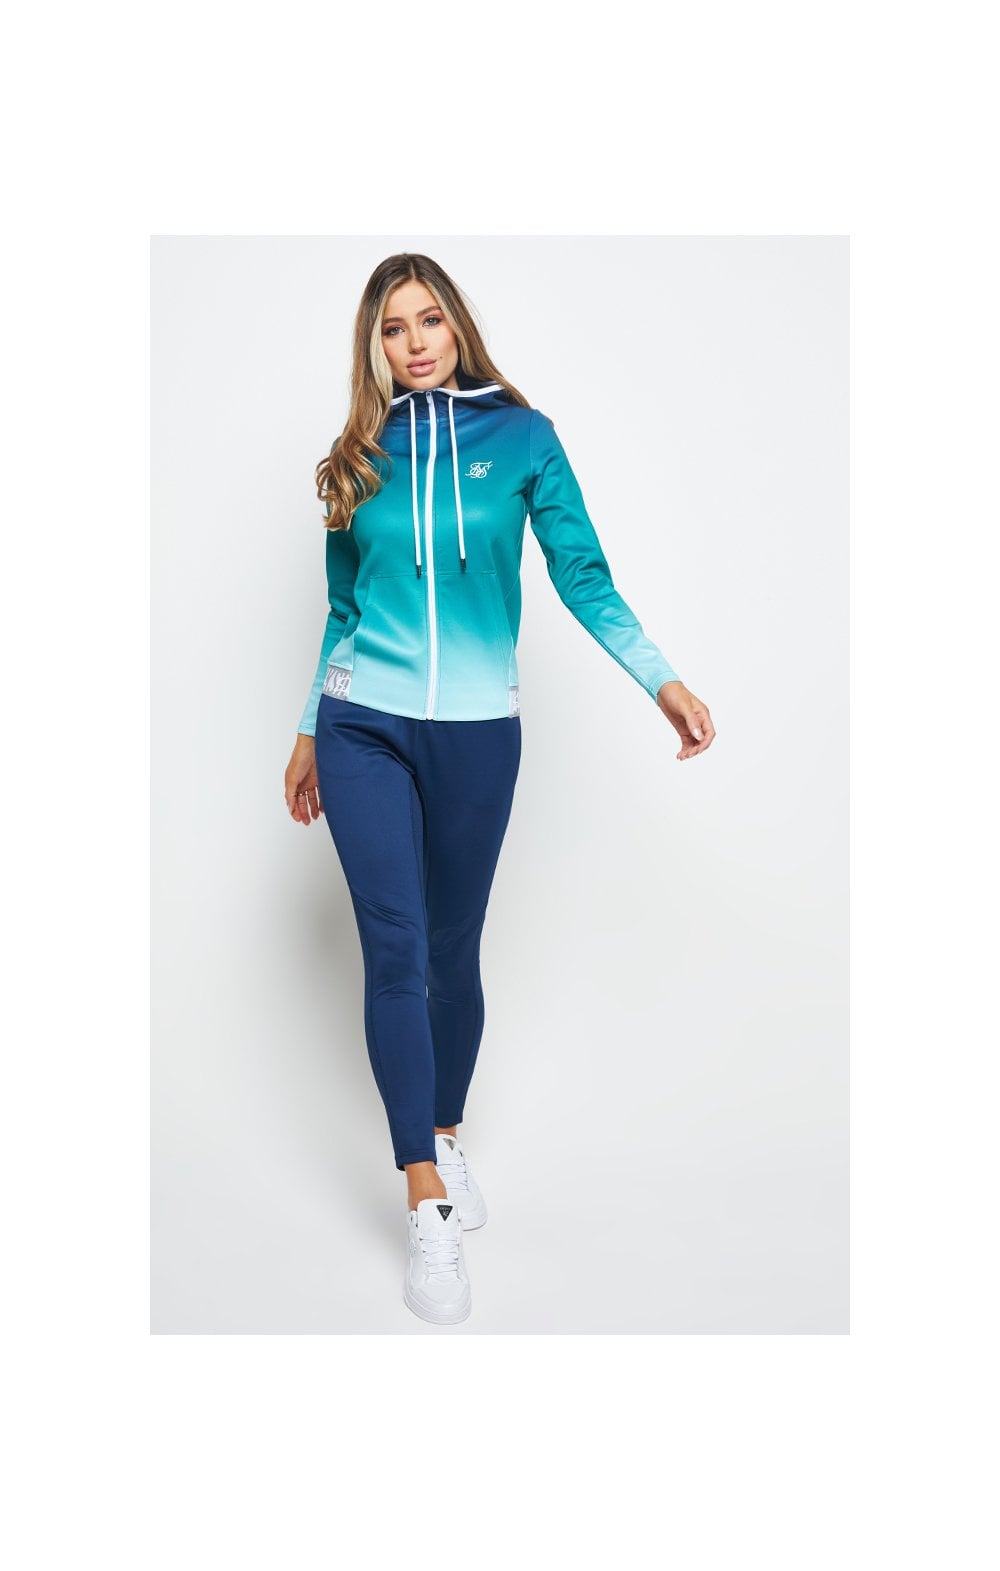 SikSilk Fade Tape Track Jacket - Navy & Teal (3)